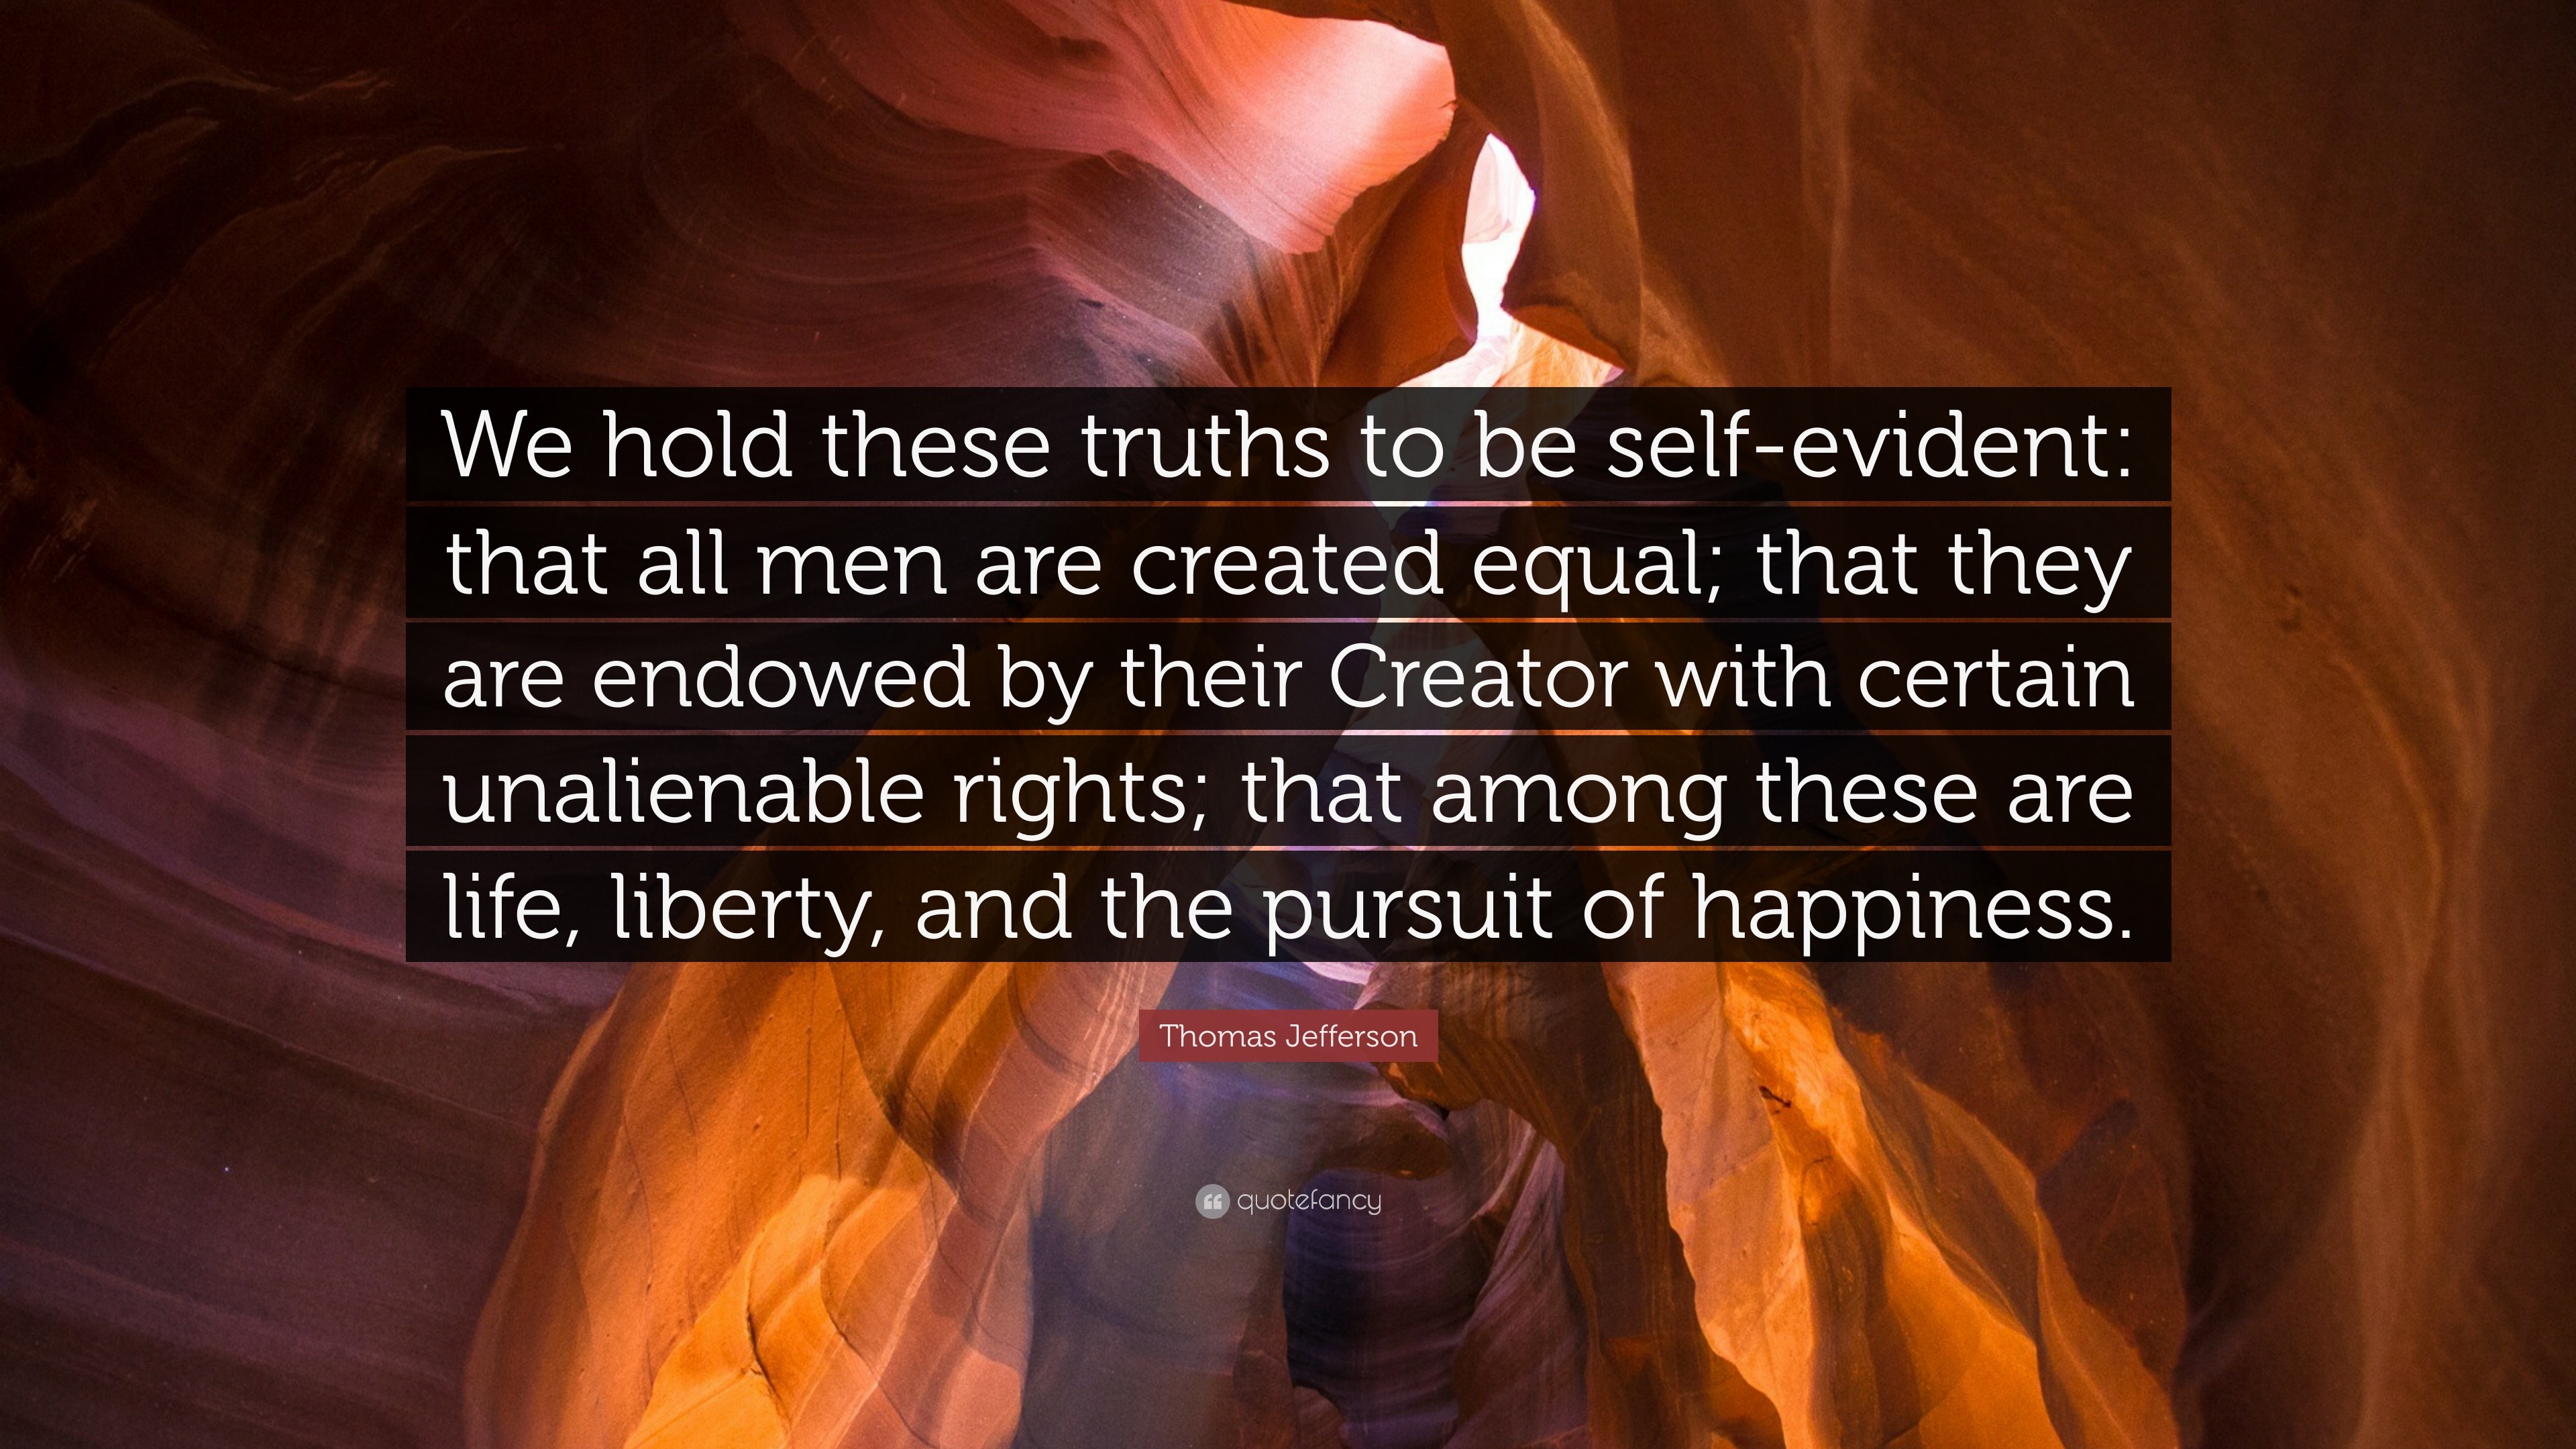 Thomas Jefferson Quote “We hold these truths to be self evident that